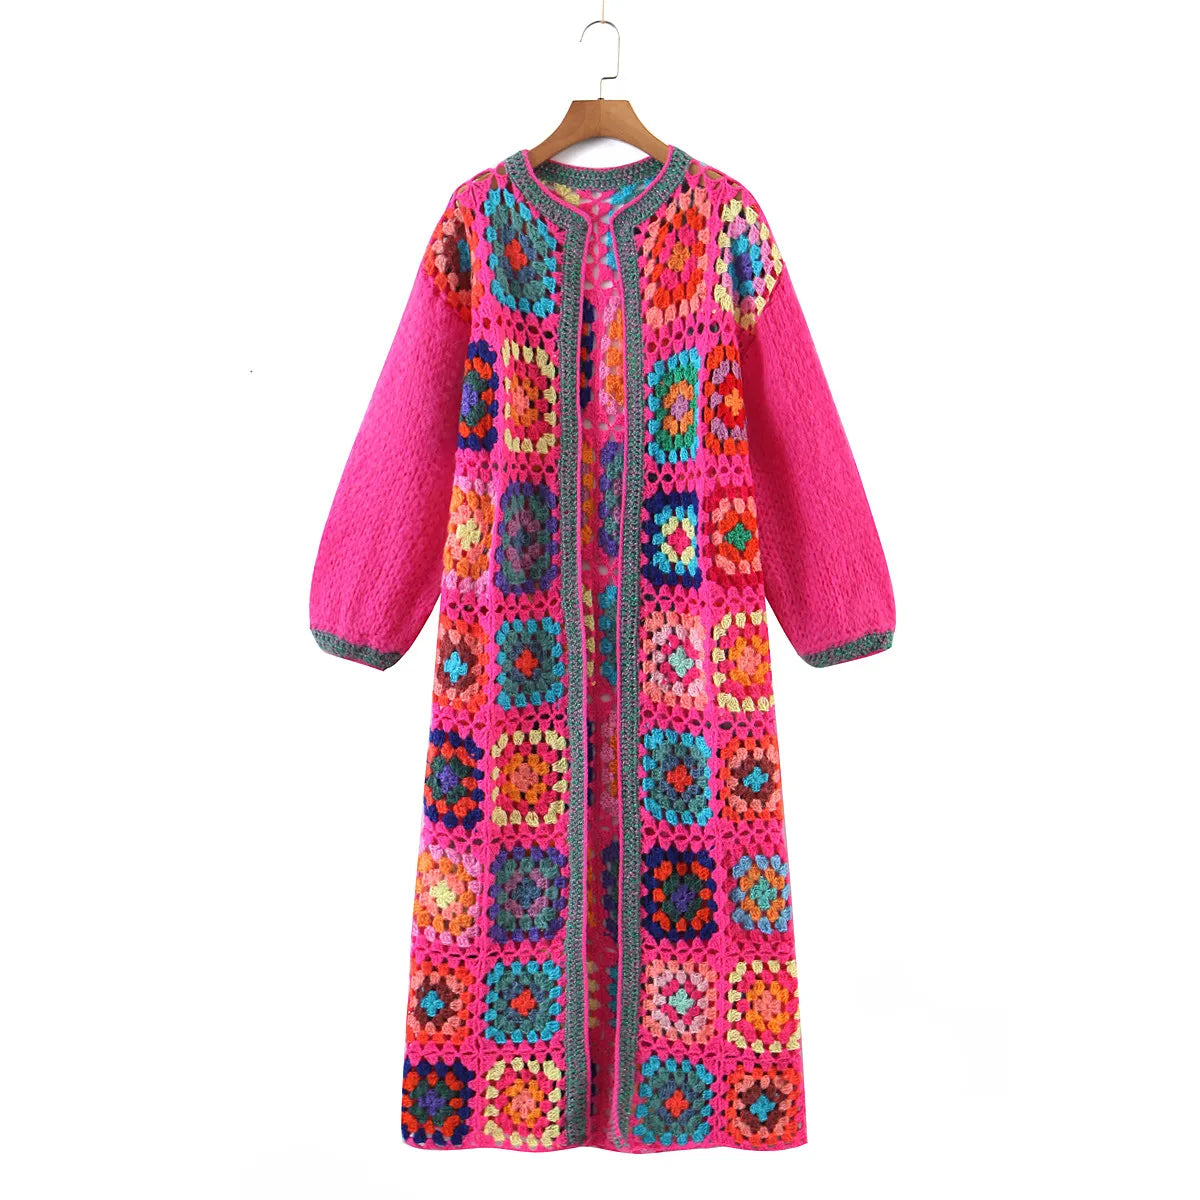 Bohemia Vintage Colored Plaid Flower Granny Square Hand Crochet Hooded Long Cardigan Coats & Jackets jehouze One Size Rose Red 